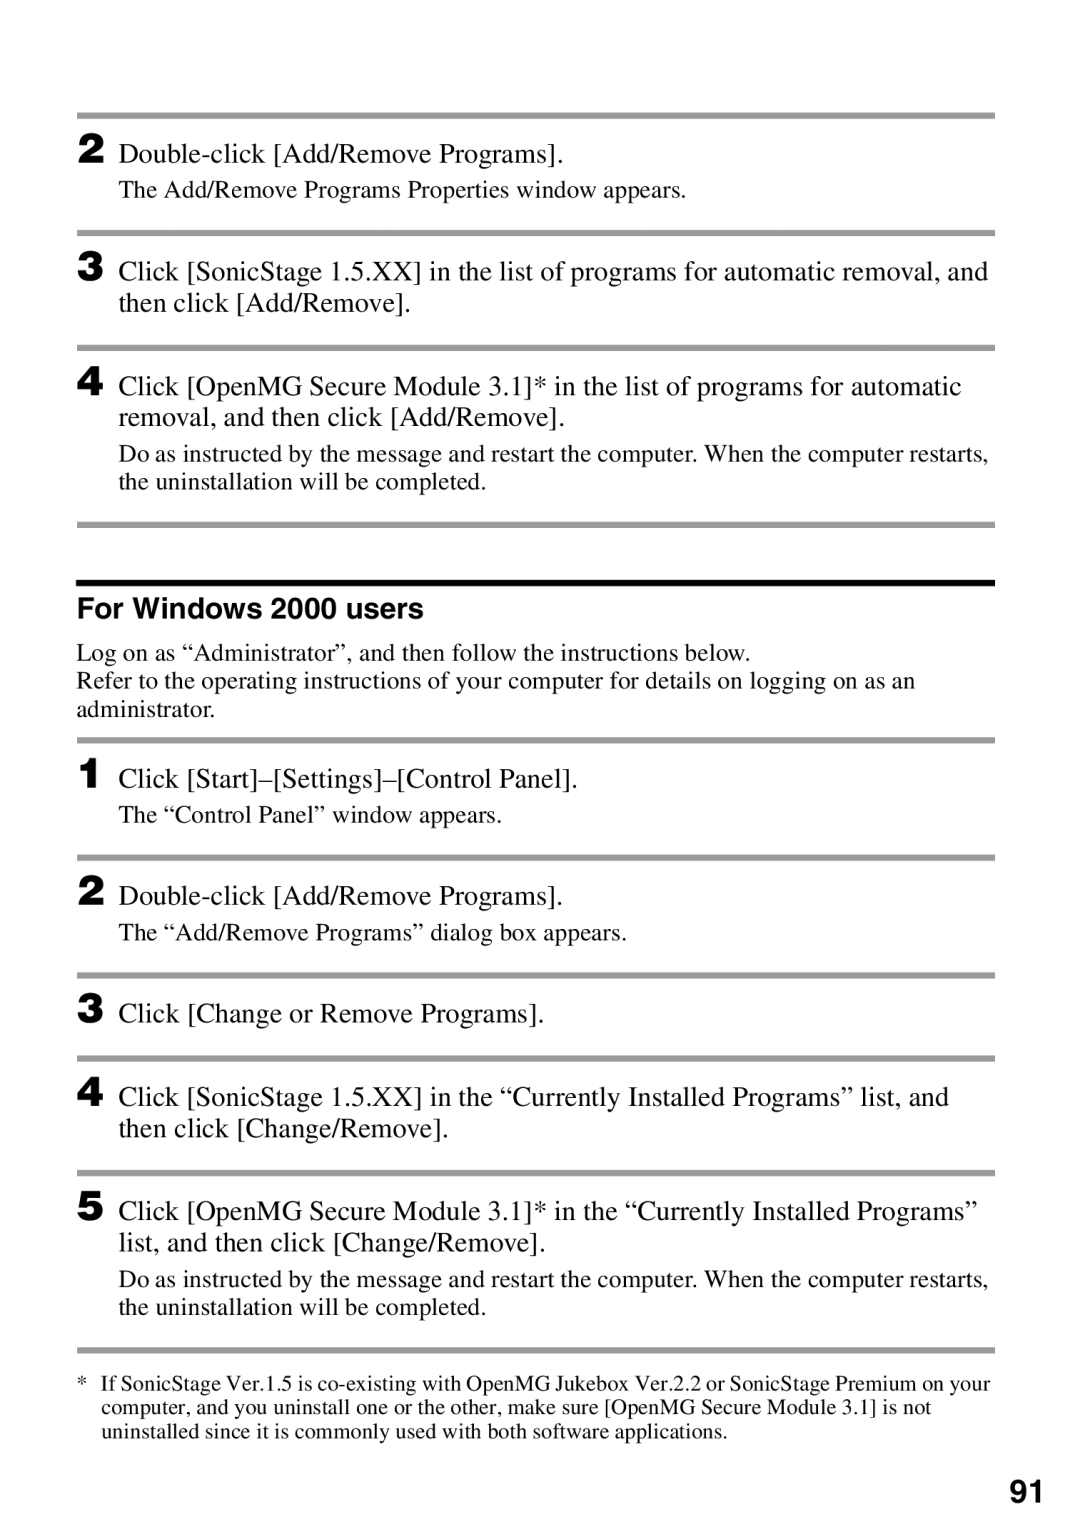 Sony MZ-N510 operating instructions For Windows 2000 users 